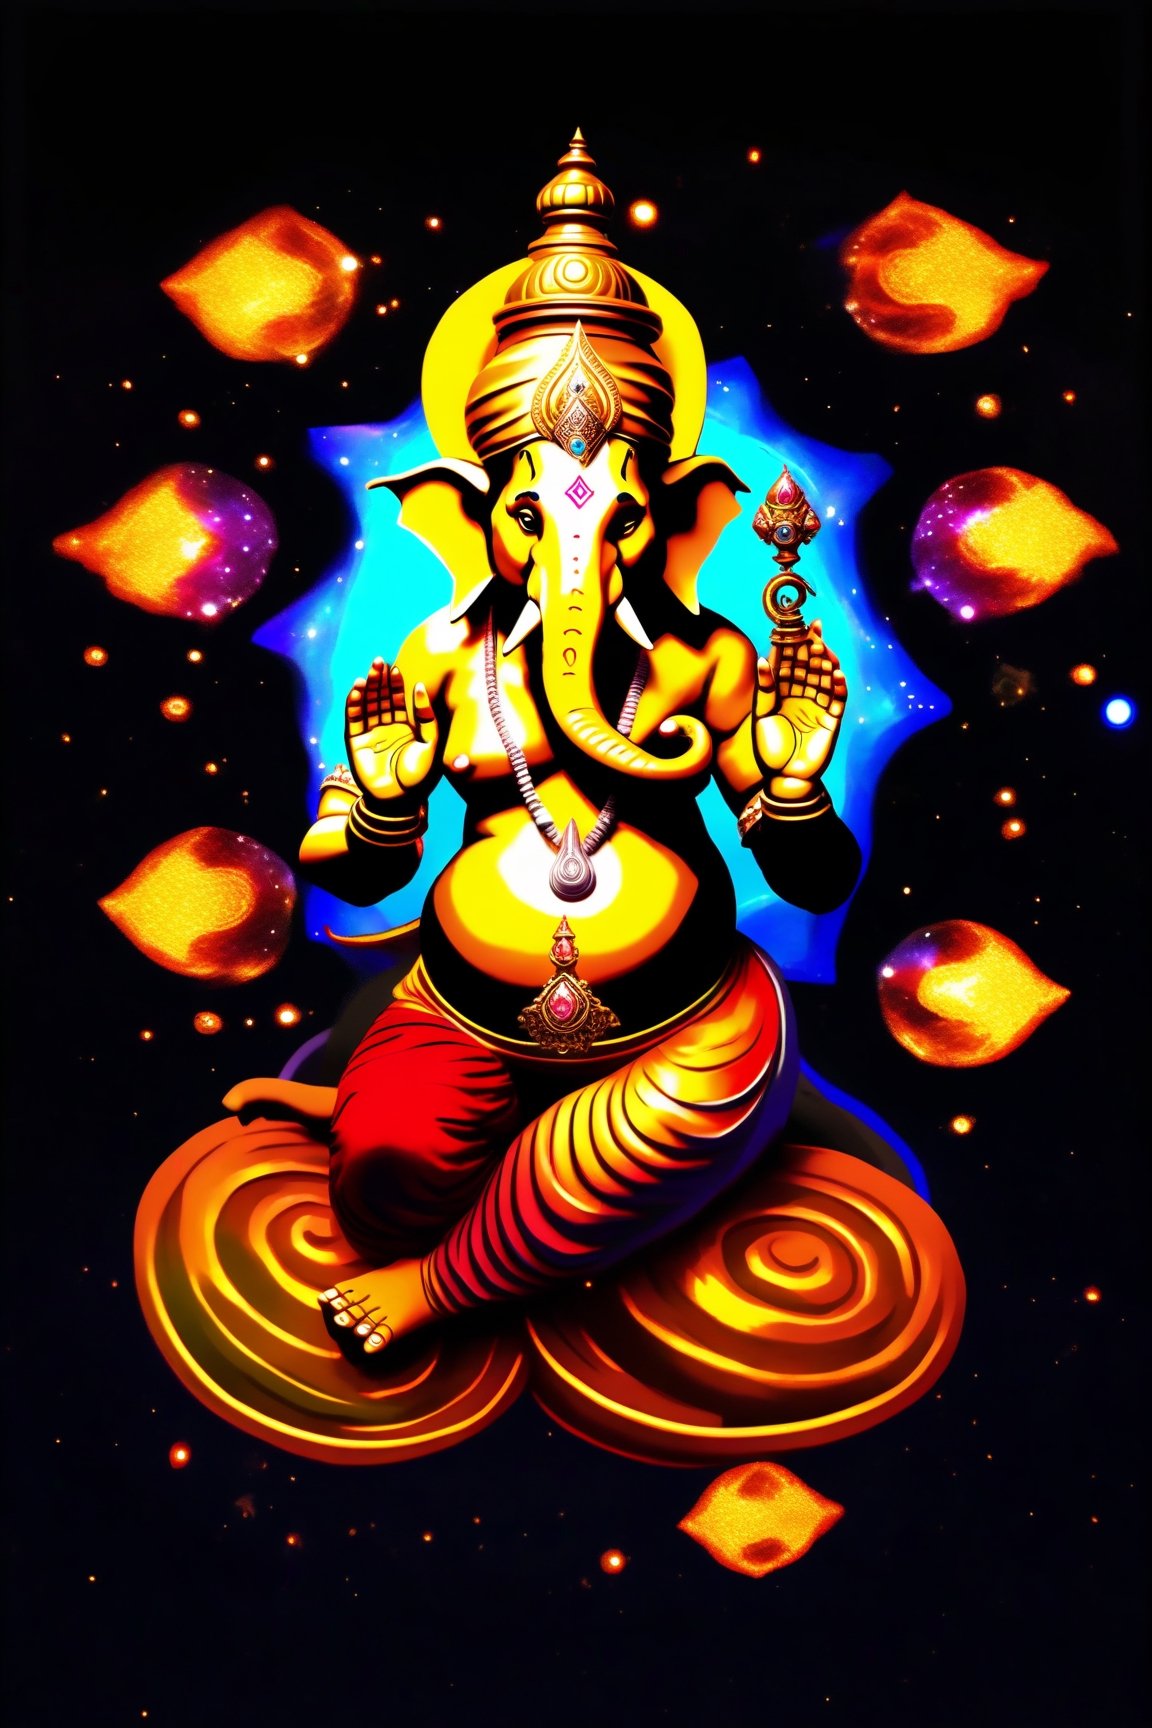 In a dimension where stars collide, the legendary Hindu God Ganesh in multicolor wearing jewelry in gold and diamond and sitting on a throne during Ganesh Chaturthi in space, rendered in Unreal Engine 5 with vivid colors and cinematic color grading emerges as an embodiment of celestial fury. Its body is a symphony of radiant colors, mirroring the birth of stars. Its eyes blaze with cosmic fire, and tendrils of energy arc around its form like ethereal lightning. Lord Ganesh harnesses the power of the cosmos itself, Amidst a cosmic maelstrom, where galaxies spiral and stars explode, the serpent reigns supreme, Epic, cataclysmic, and transcendent, evoking the power of celestial forces. Style: Ultra-realistic digital painting with intricate details and a dynamic interplay of colors. Execution: Rendered in a hyper-realistic style, using advanced digital techniques to capture the Imagination.,arcane